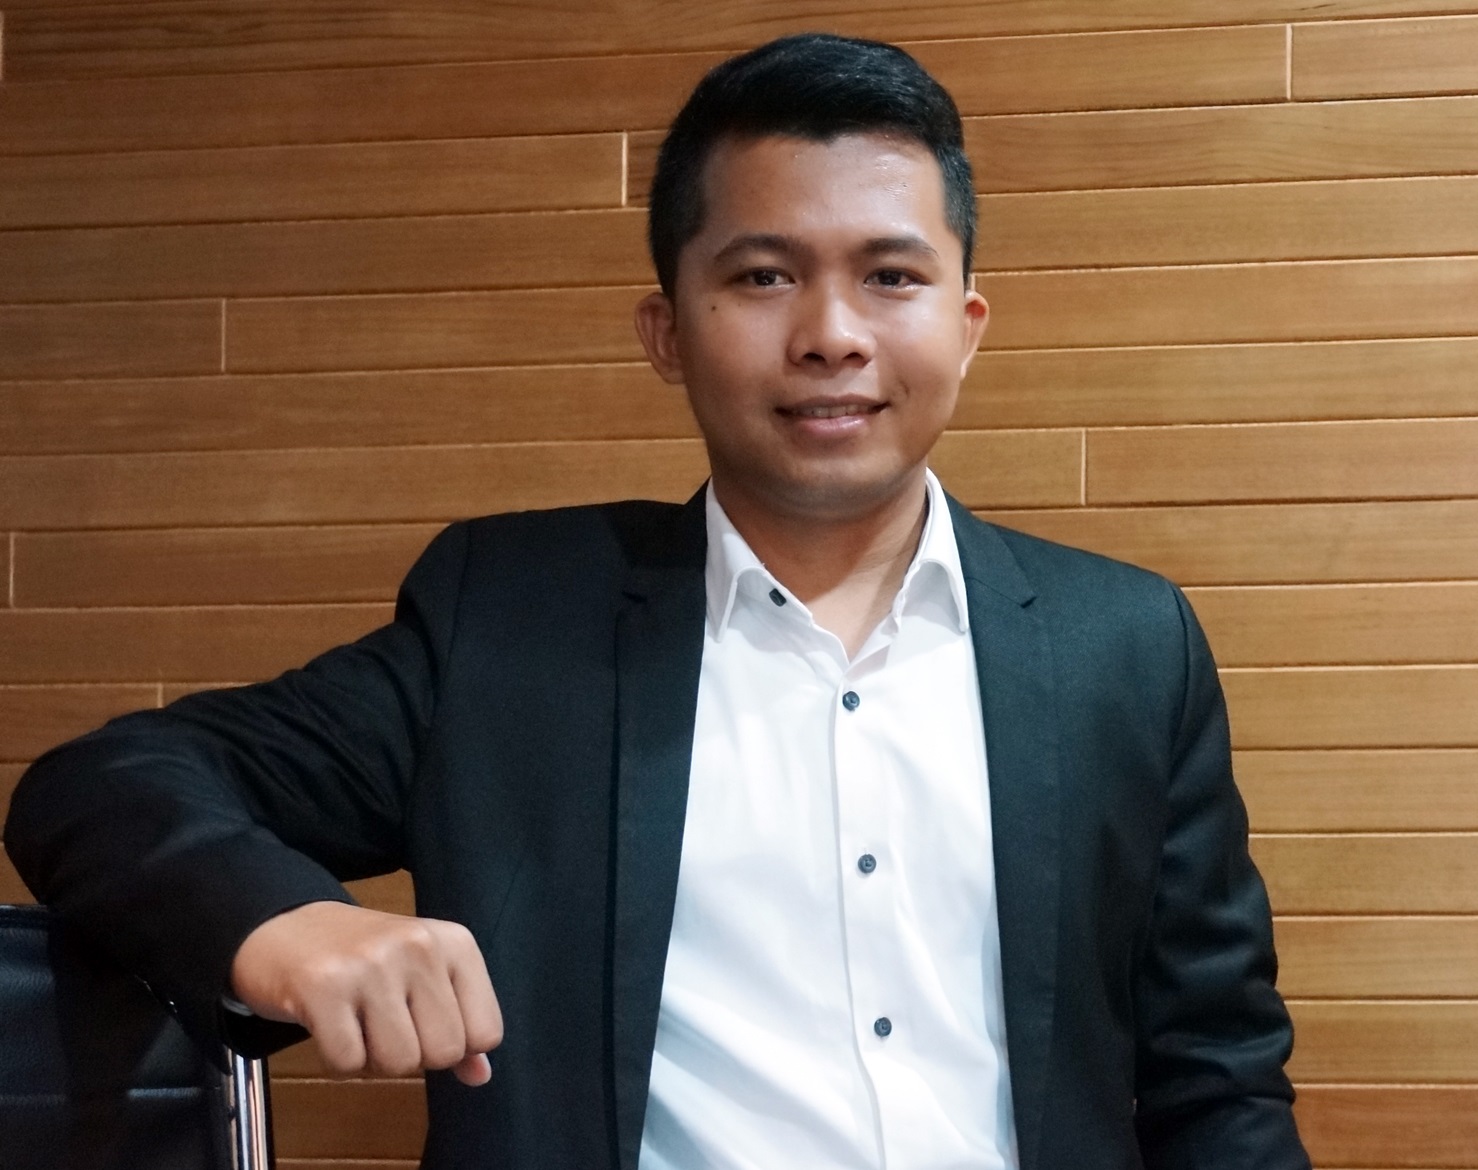 Bahaso aims to help all Indonesians excel in English